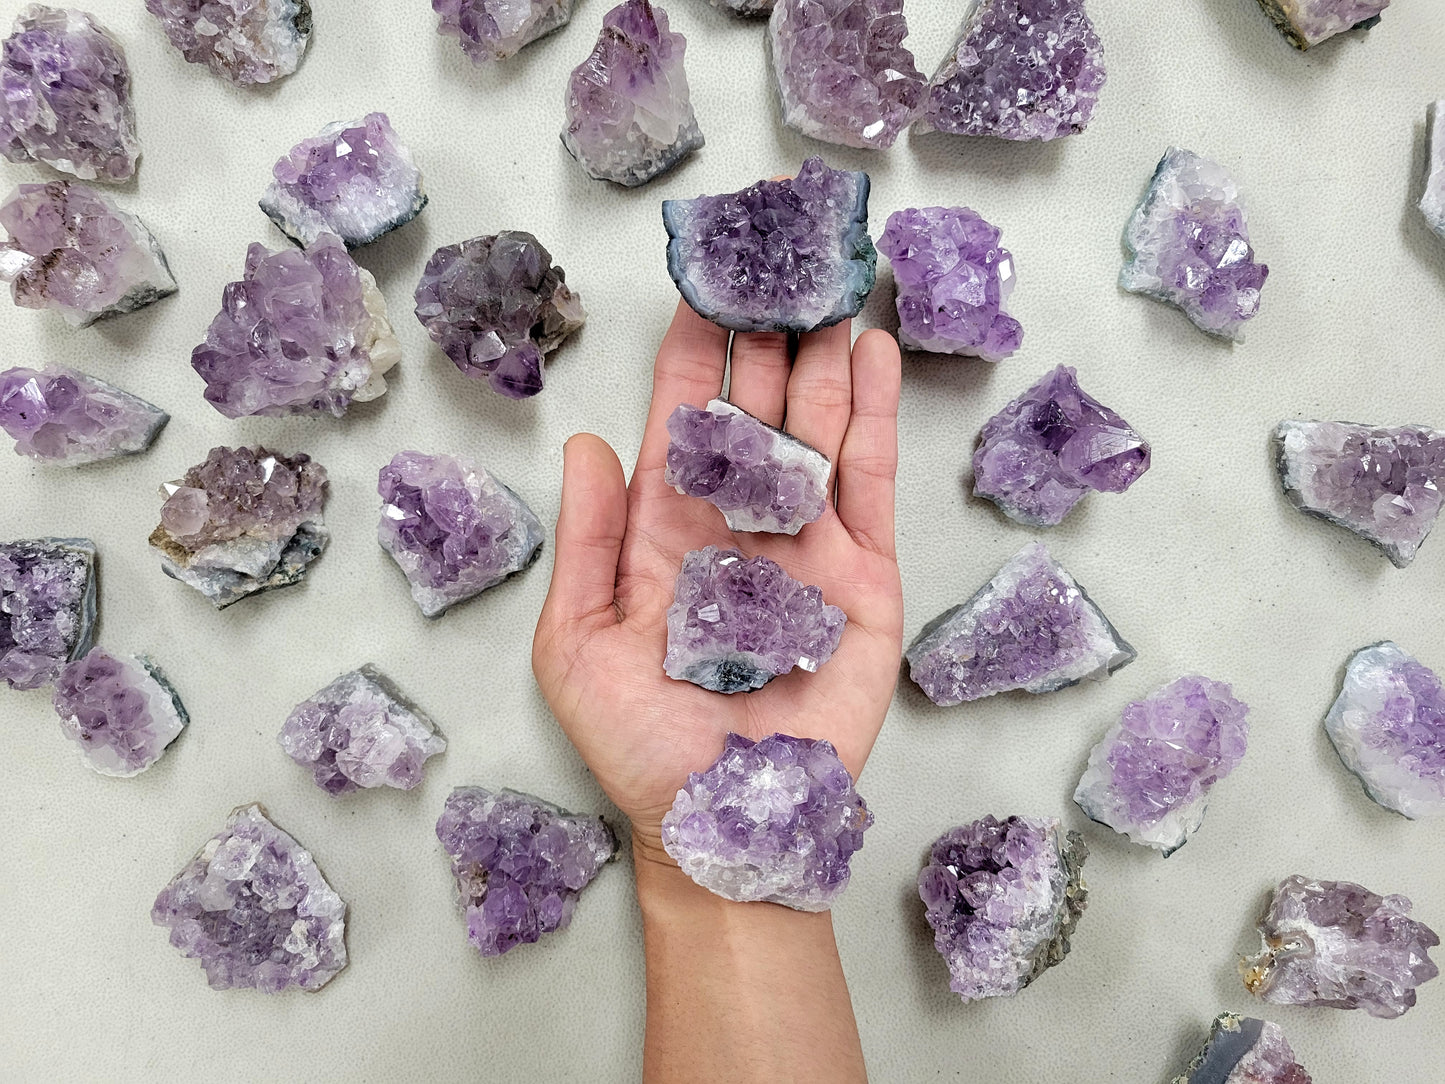 Mini Amethyst Clusters From Brazil